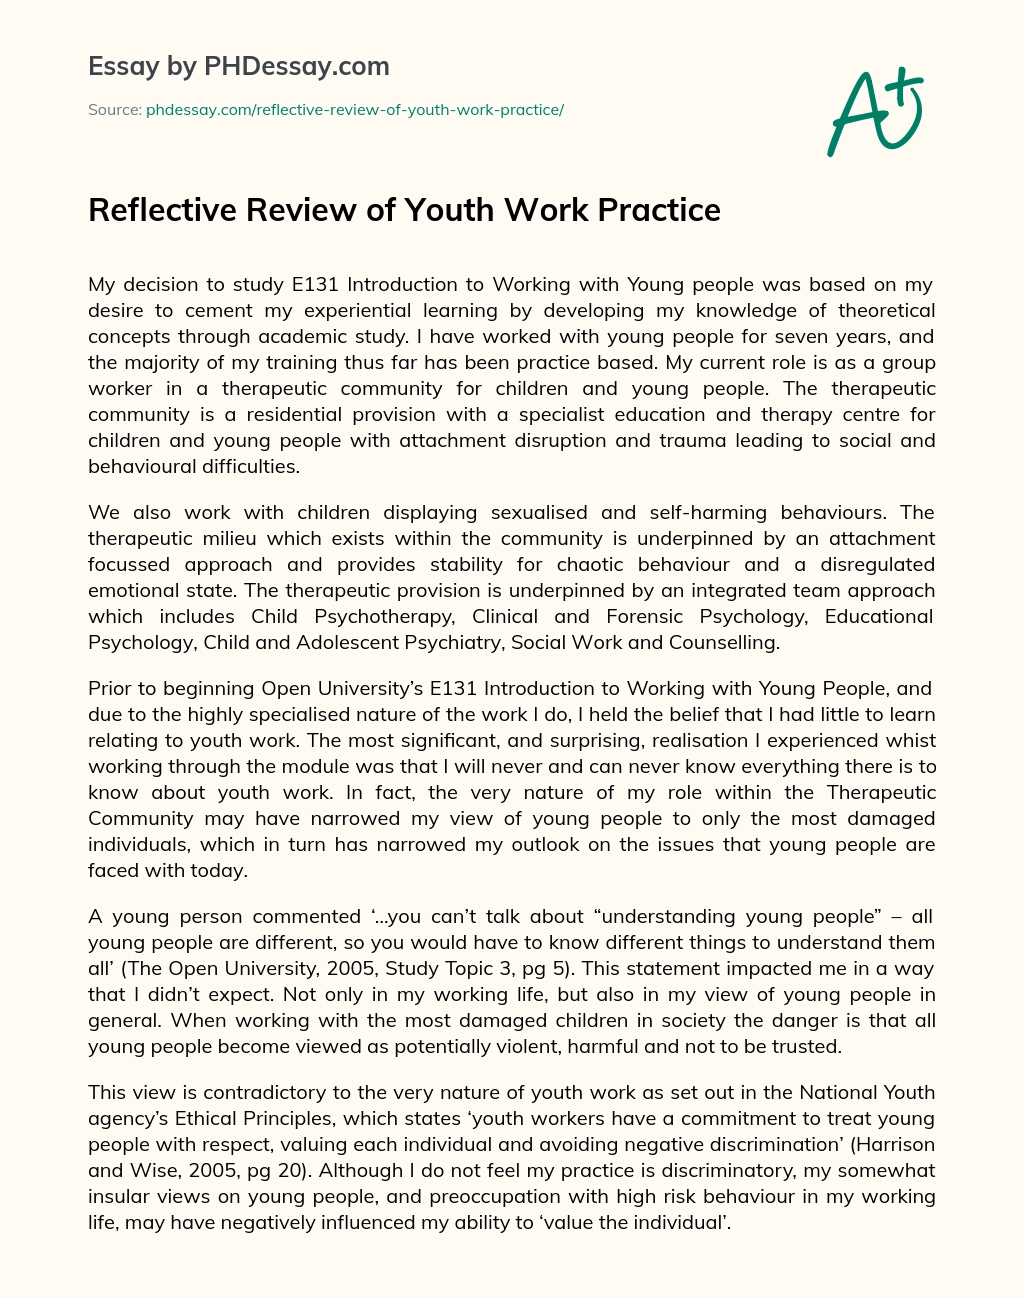 Reflective Review of Youth Work Practice - PHDessay.com